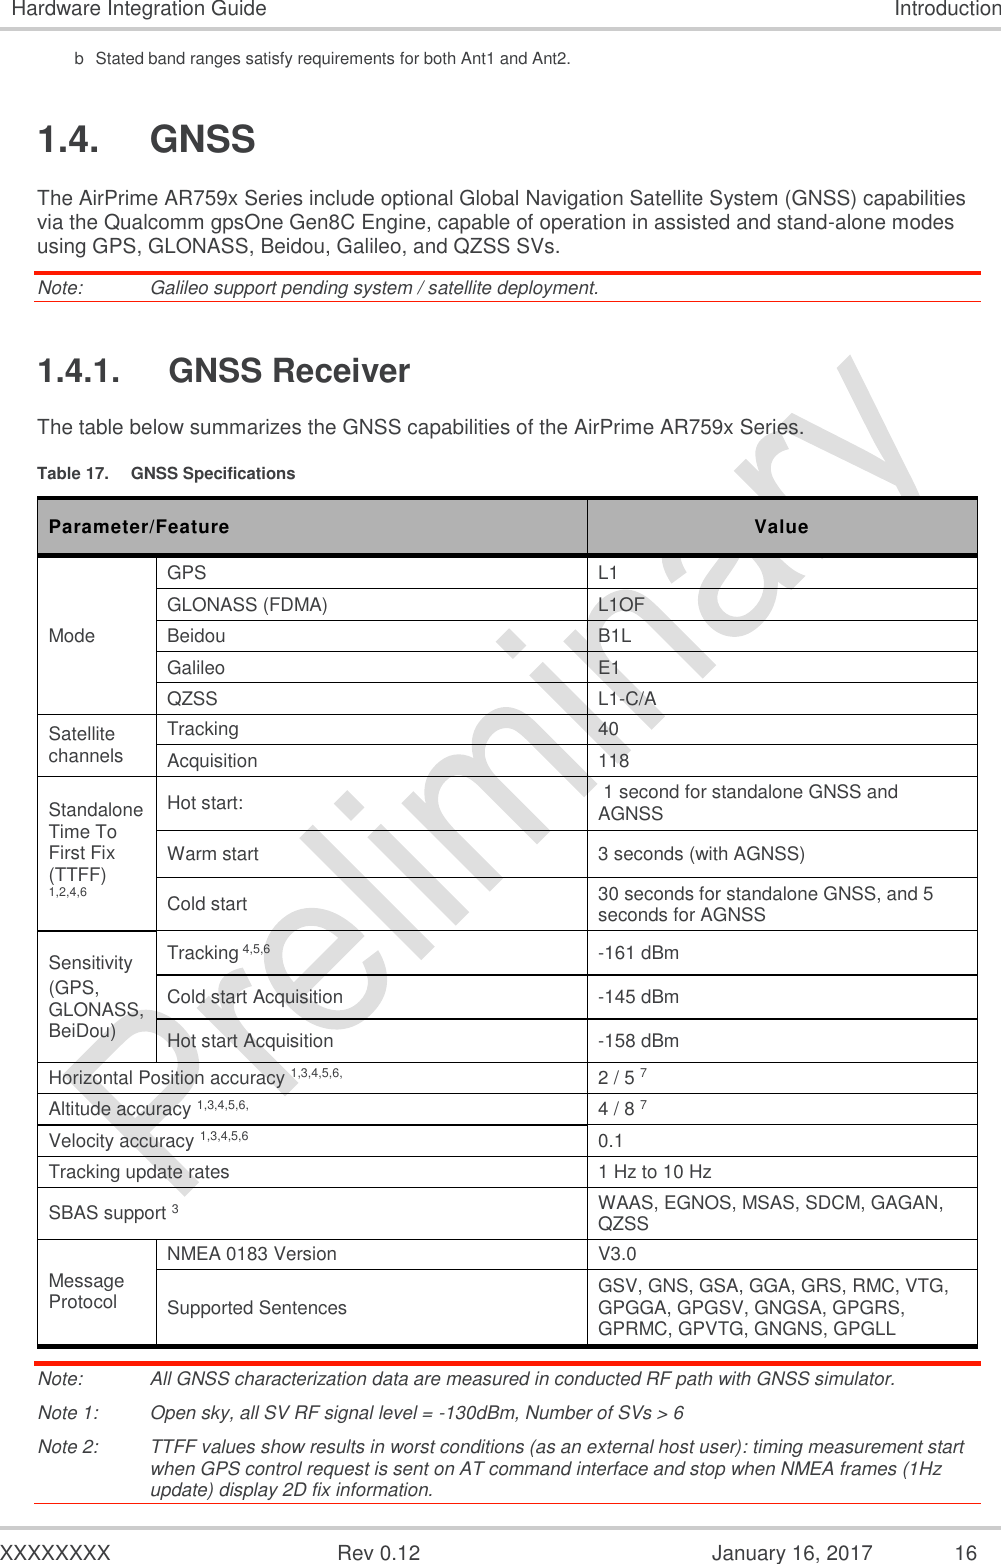  XXXXXXXX  Rev 0.12  January 16, 2017 16 Hardware Integration Guide Introduction b  Stated band ranges satisfy requirements for both Ant1 and Ant2. 1.4.  GNSS The AirPrime AR759x Series include optional Global Navigation Satellite System (GNSS) capabilities via the Qualcomm gpsOne Gen8C Engine, capable of operation in assisted and stand-alone modes using GPS, GLONASS, Beidou, Galileo, and QZSS SVs. Note:   Galileo support pending system / satellite deployment. 1.4.1.  GNSS Receiver The table below summarizes the GNSS capabilities of the AirPrime AR759x Series. Table 17.  GNSS Specifications Parameter/Feature Value Mode GPS L1 GLONASS (FDMA) L1OF Beidou B1L Galileo E1 QZSS L1-C/A Satellite channels Tracking 40 Acquisition 118 Standalone Time To First Fix (TTFF) 1,2,4,6 Hot start:   1 second for standalone GNSS and AGNSS Warm start 3 seconds (with AGNSS) Cold start 30 seconds for standalone GNSS, and 5 seconds for AGNSS Sensitivity (GPS, GLONASS, BeiDou) Tracking 4,5,6 -161 dBm Cold start Acquisition -145 dBm Hot start Acquisition -158 dBm Horizontal Position accuracy 1,3,4,5,6, 2 / 5 7 Altitude accuracy 1,3,4,5,6, 4 / 8 7 Velocity accuracy 1,3,4,5,6 0.1 Tracking update rates 1 Hz to 10 Hz SBAS support 3 WAAS, EGNOS, MSAS, SDCM, GAGAN, QZSS Message Protocol NMEA 0183 Version V3.0 Supported Sentences GSV, GNS, GSA, GGA, GRS, RMC, VTG, GPGGA, GPGSV, GNGSA, GPGRS, GPRMC, GPVTG, GNGNS, GPGLL Note:   All GNSS characterization data are measured in conducted RF path with GNSS simulator. Note 1:  Open sky, all SV RF signal level = -130dBm, Number of SVs &gt; 6 Note 2:  TTFF values show results in worst conditions (as an external host user): timing measurement start when GPS control request is sent on AT command interface and stop when NMEA frames (1Hz update) display 2D fix information. 